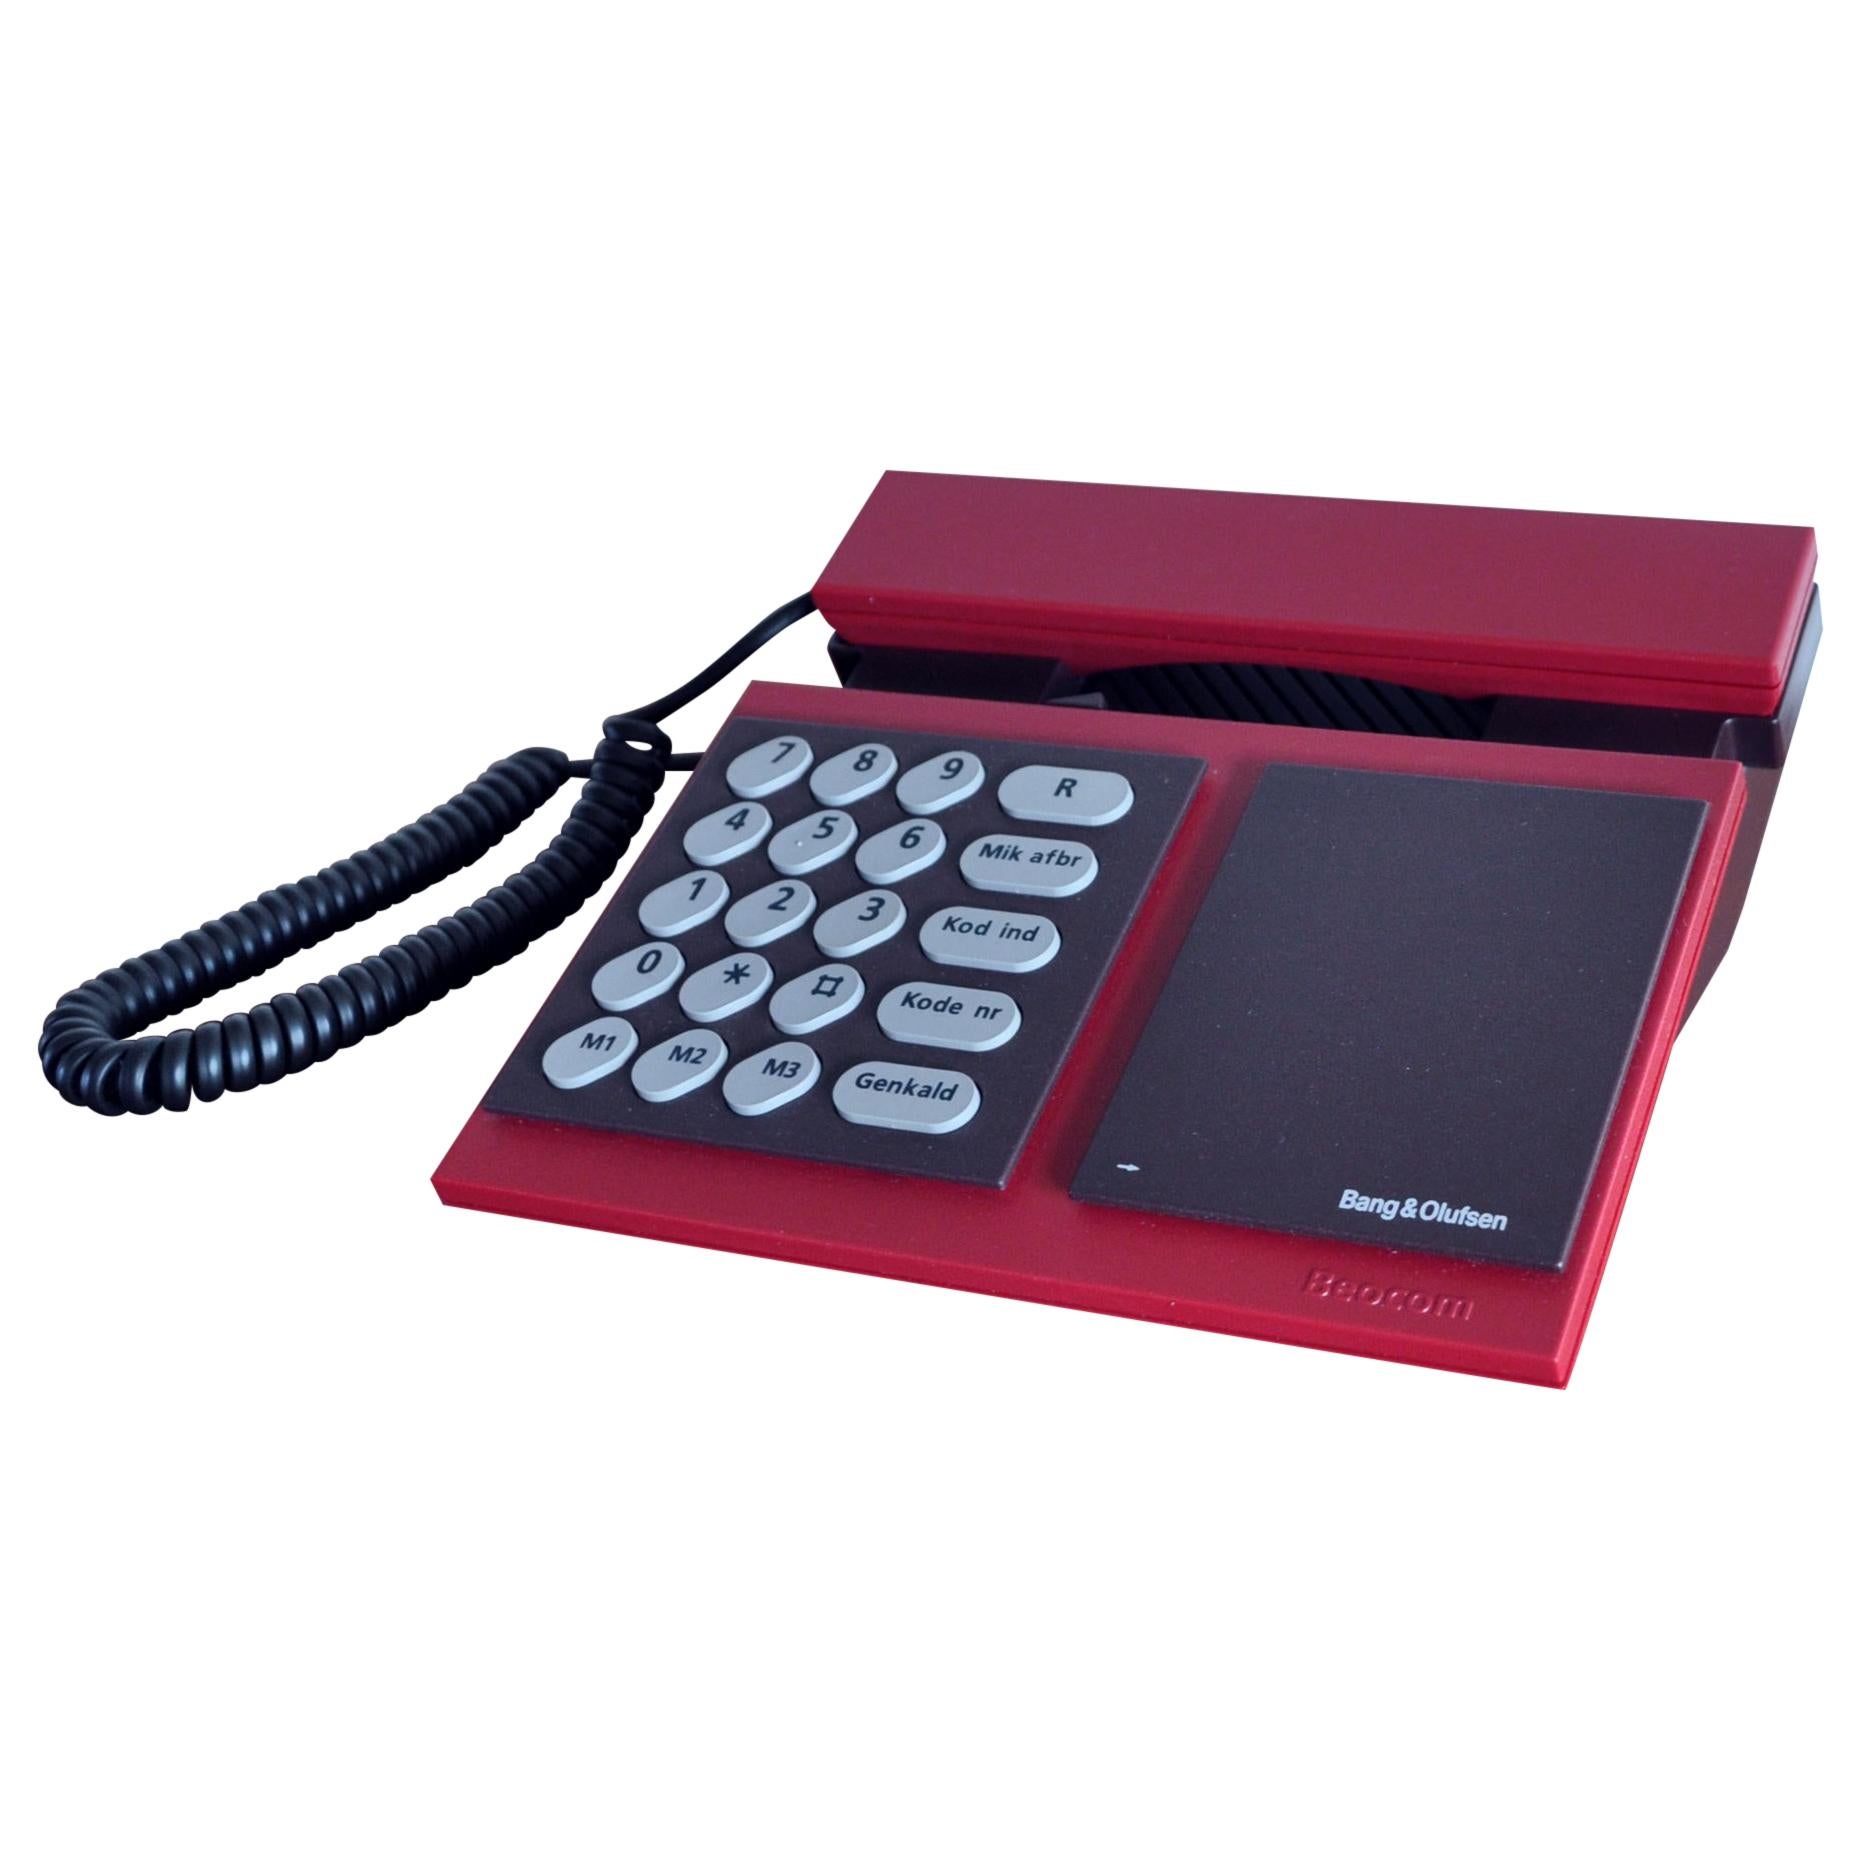 Iconic Beocom 600 Telephone from 1986 by Bang & Olusfen For Sale